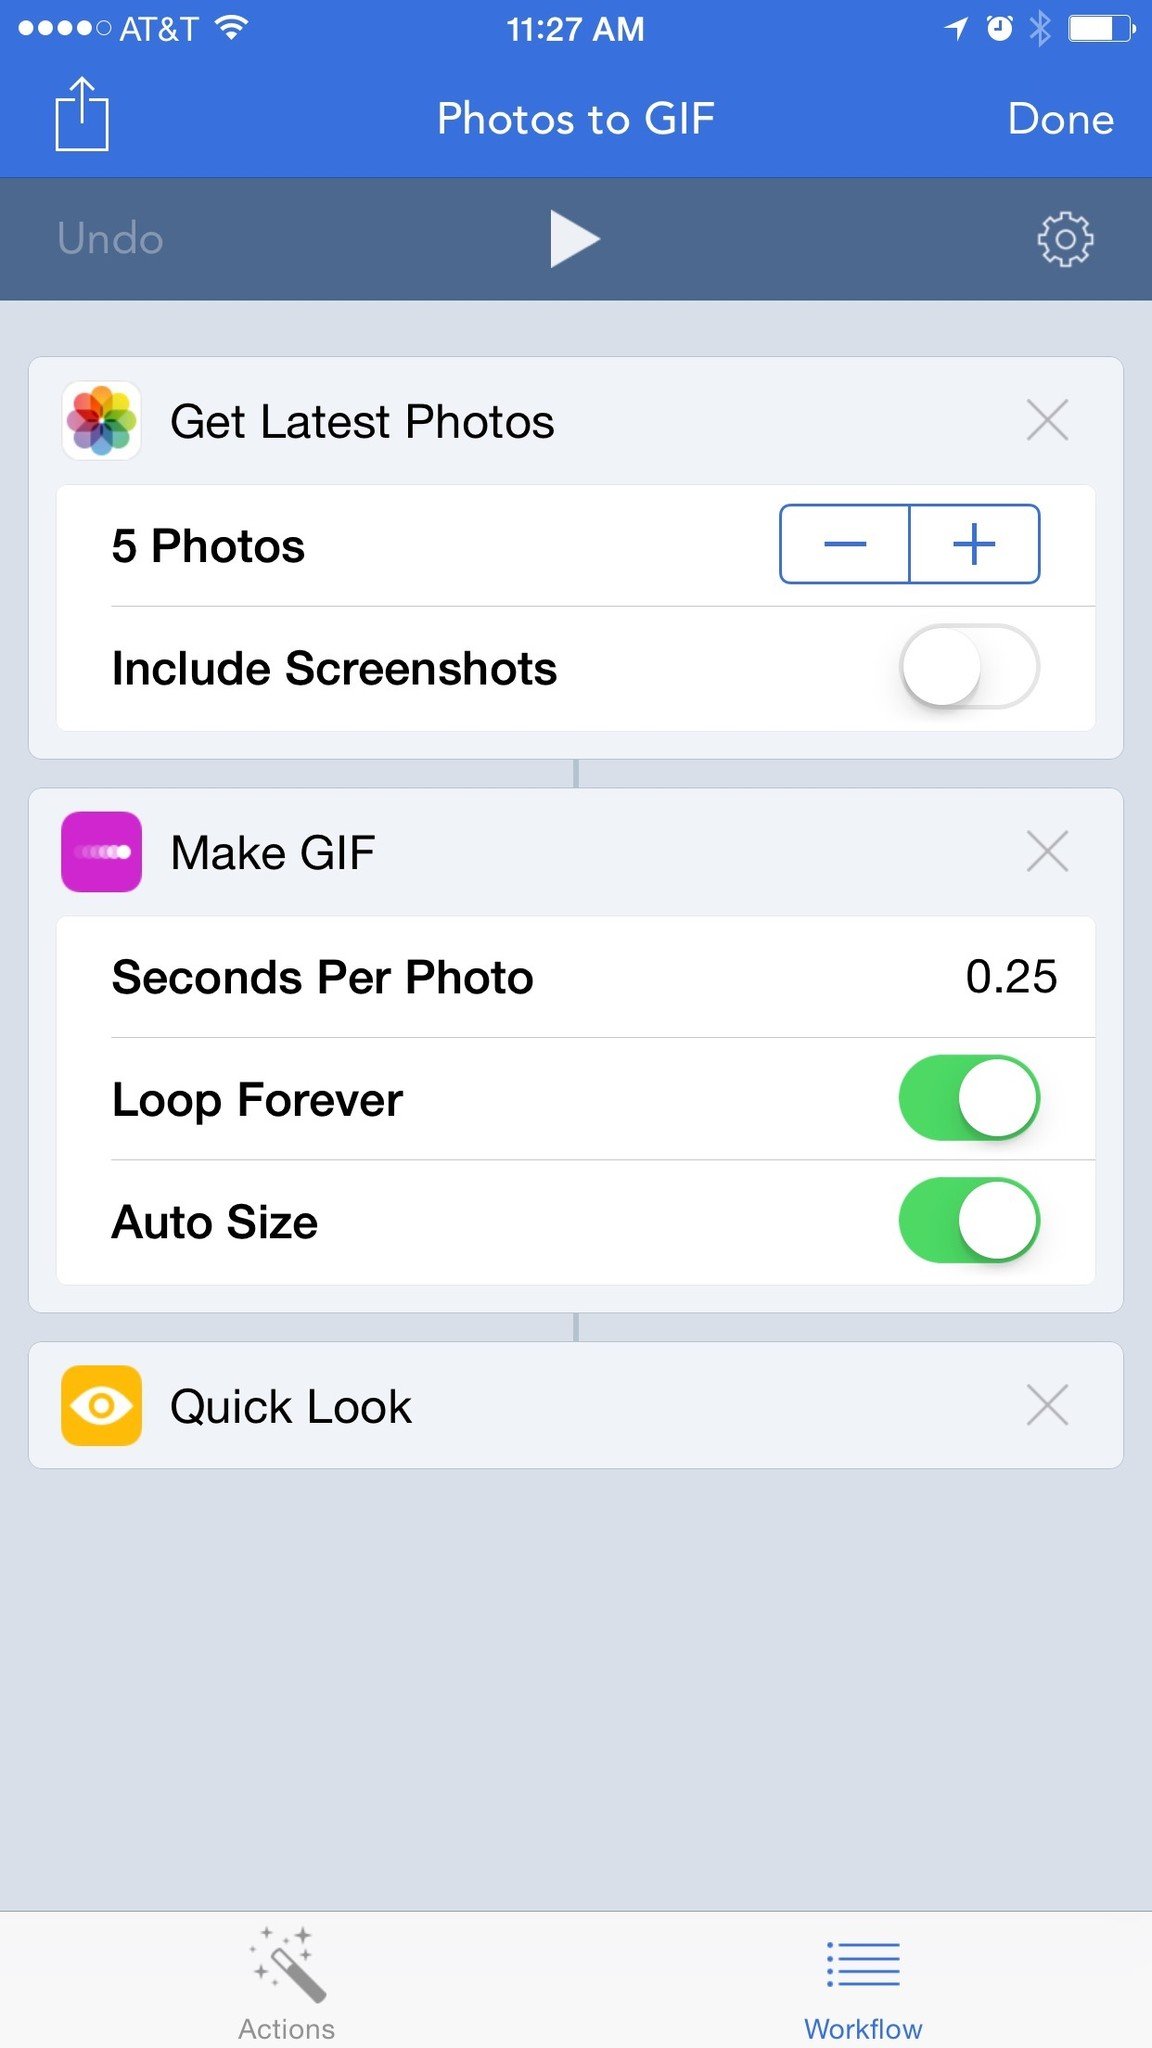 Best photo extension apps for iPhone: Workflow